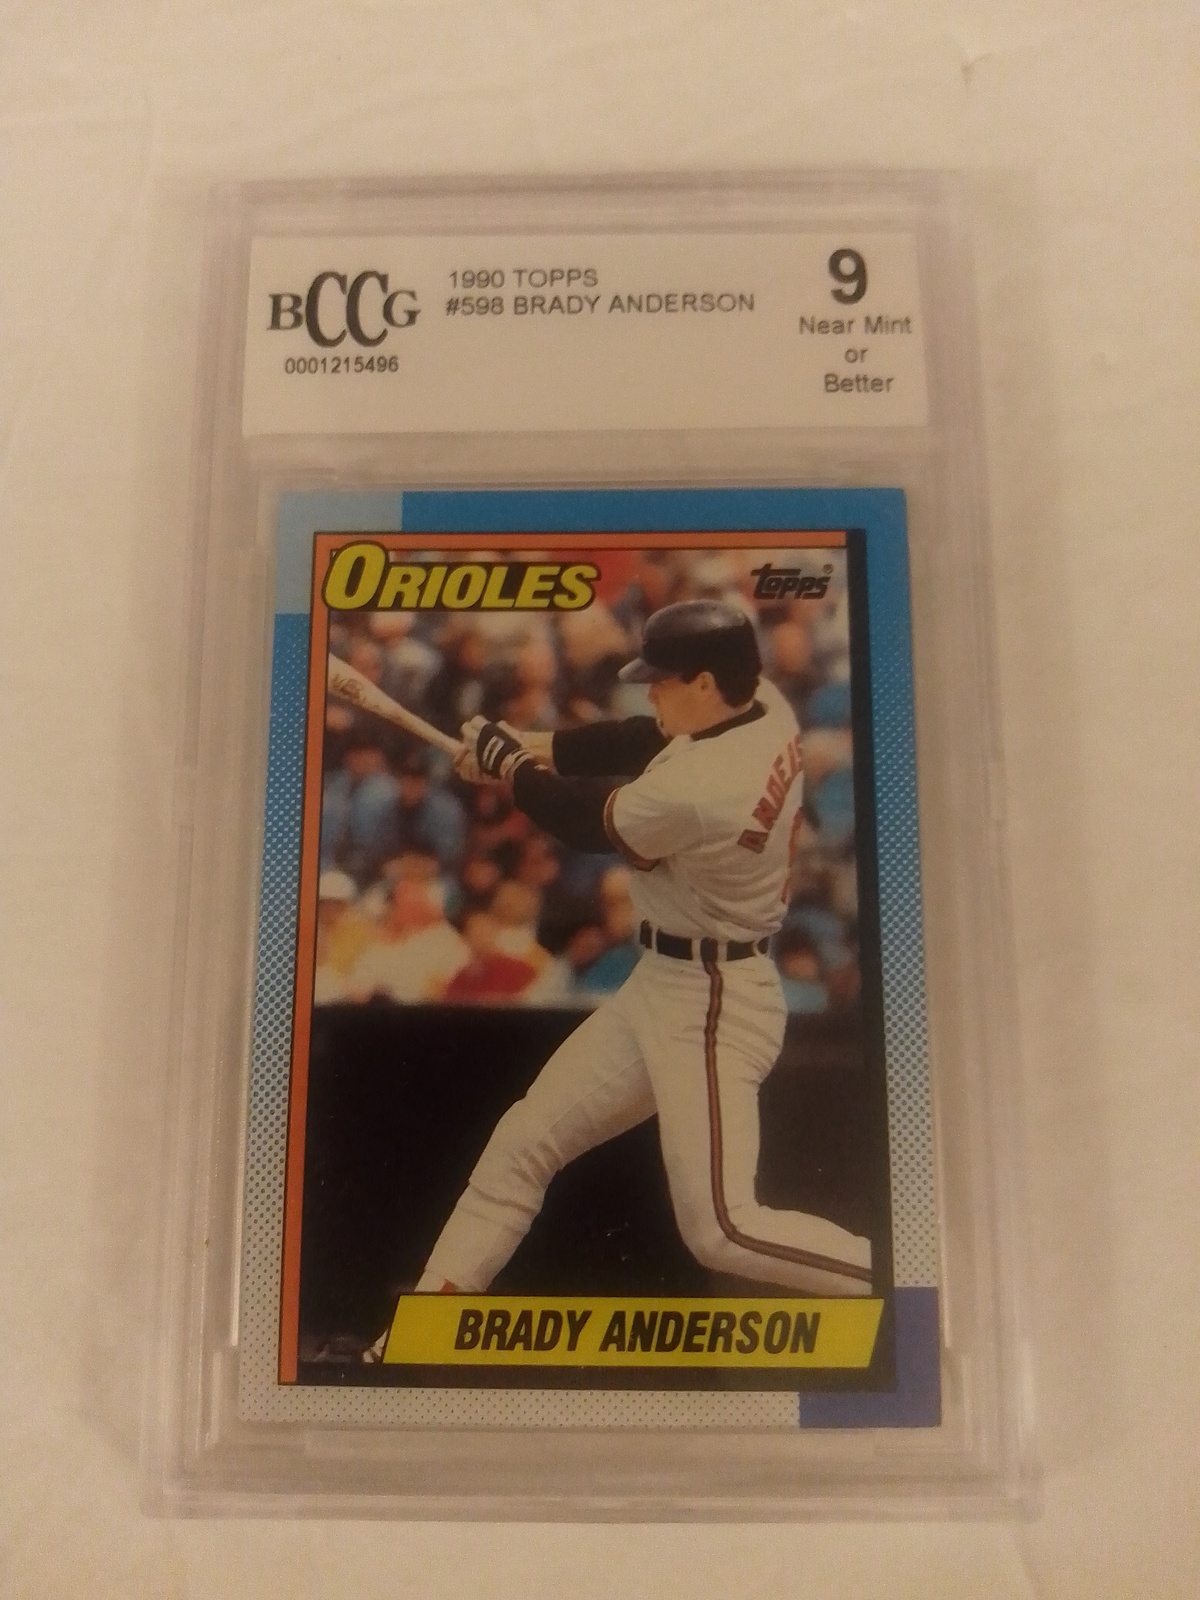 Primary image for 1990 Topps Baseball 598 Brady Anderson Becket BCCG Graded 9 Near Mint